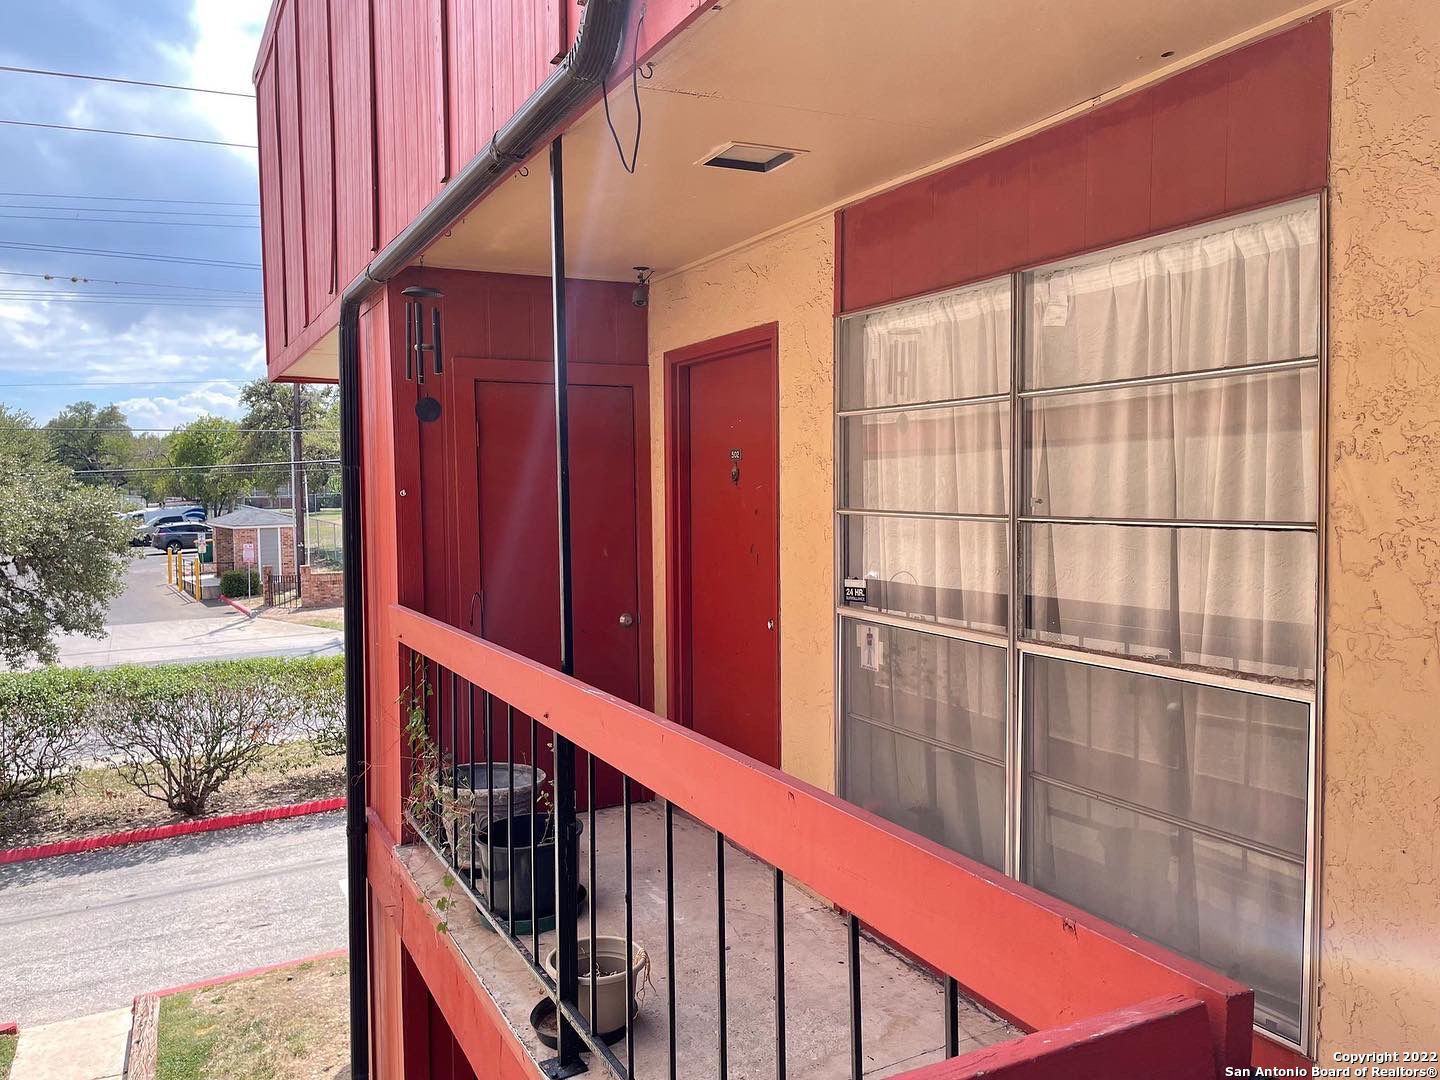 GREAT LOCATION CONDO in second floor. 2 very spacious bedrooms and 2 full  bathrooms. 2 covered carport parking spaces and guest parking on the side.   Exterior common areas with a very nice gated pool area. Great Income property!